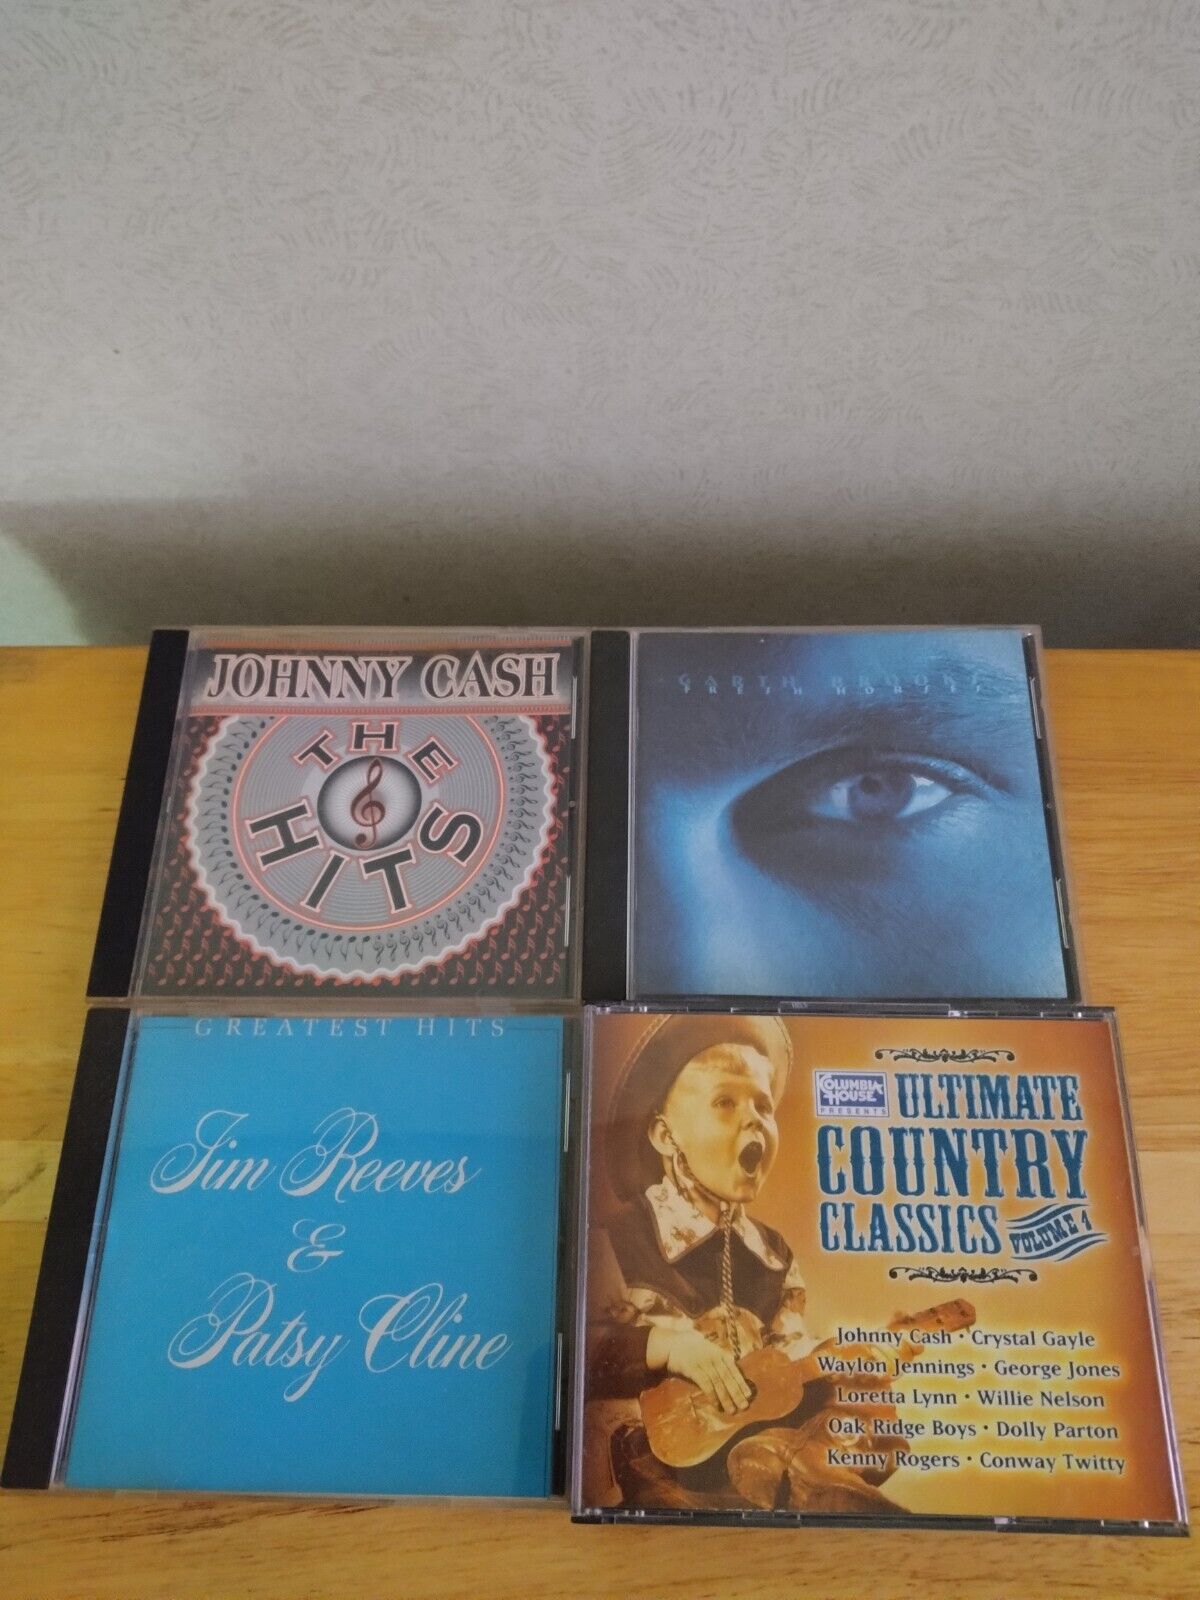 Country Music 4 CD Lot - Johnny Cash,Garth Brooks,Patsy Cline,Ultimate Country